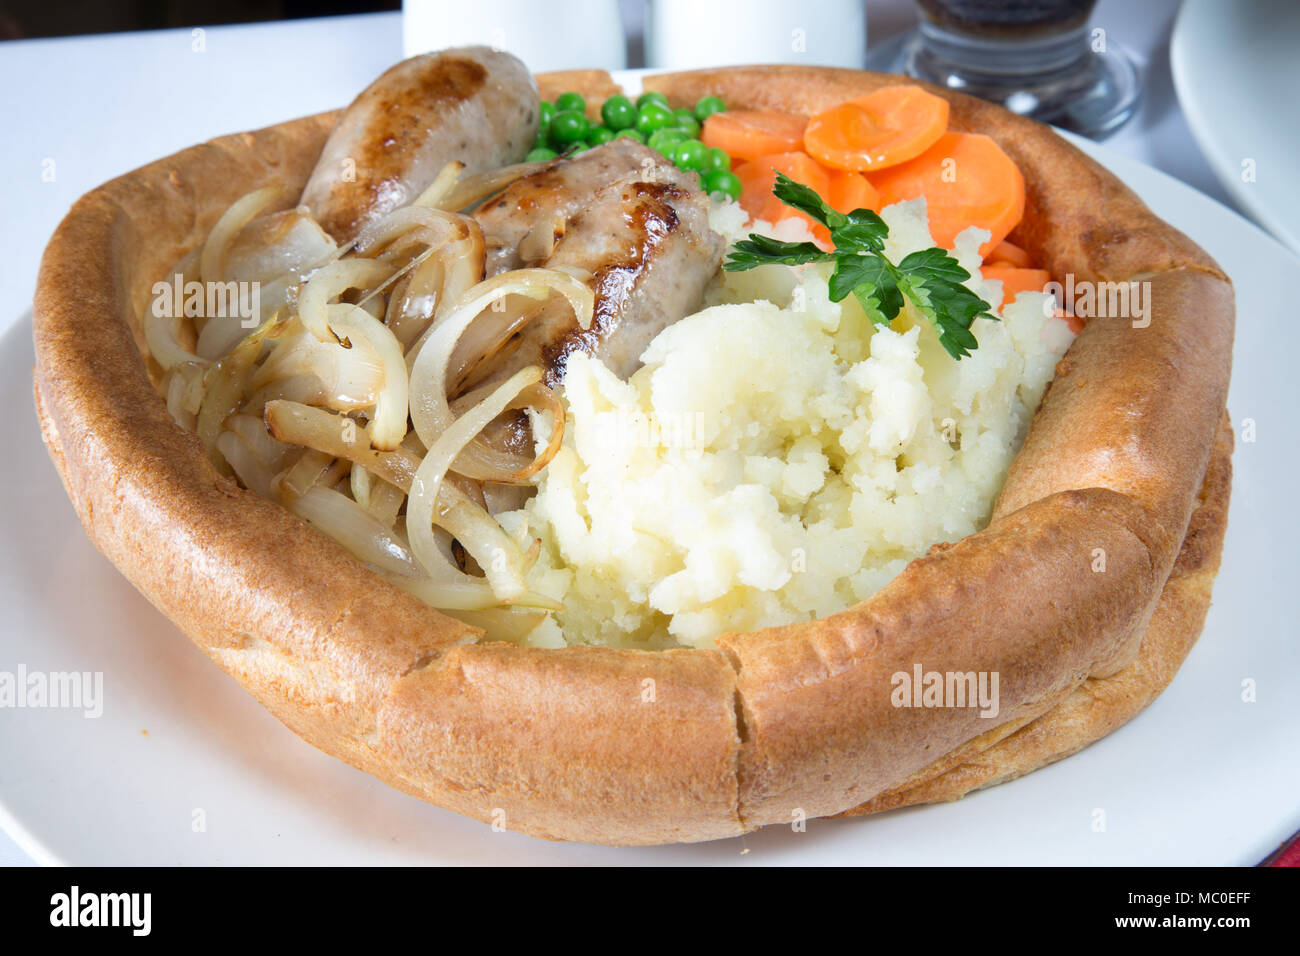 An English pub/restaurant lunch of giant Yorkshire pudding filled with Sausage and onions, creamed potato, vichy carrots, garden peas and gravy Stock Photo